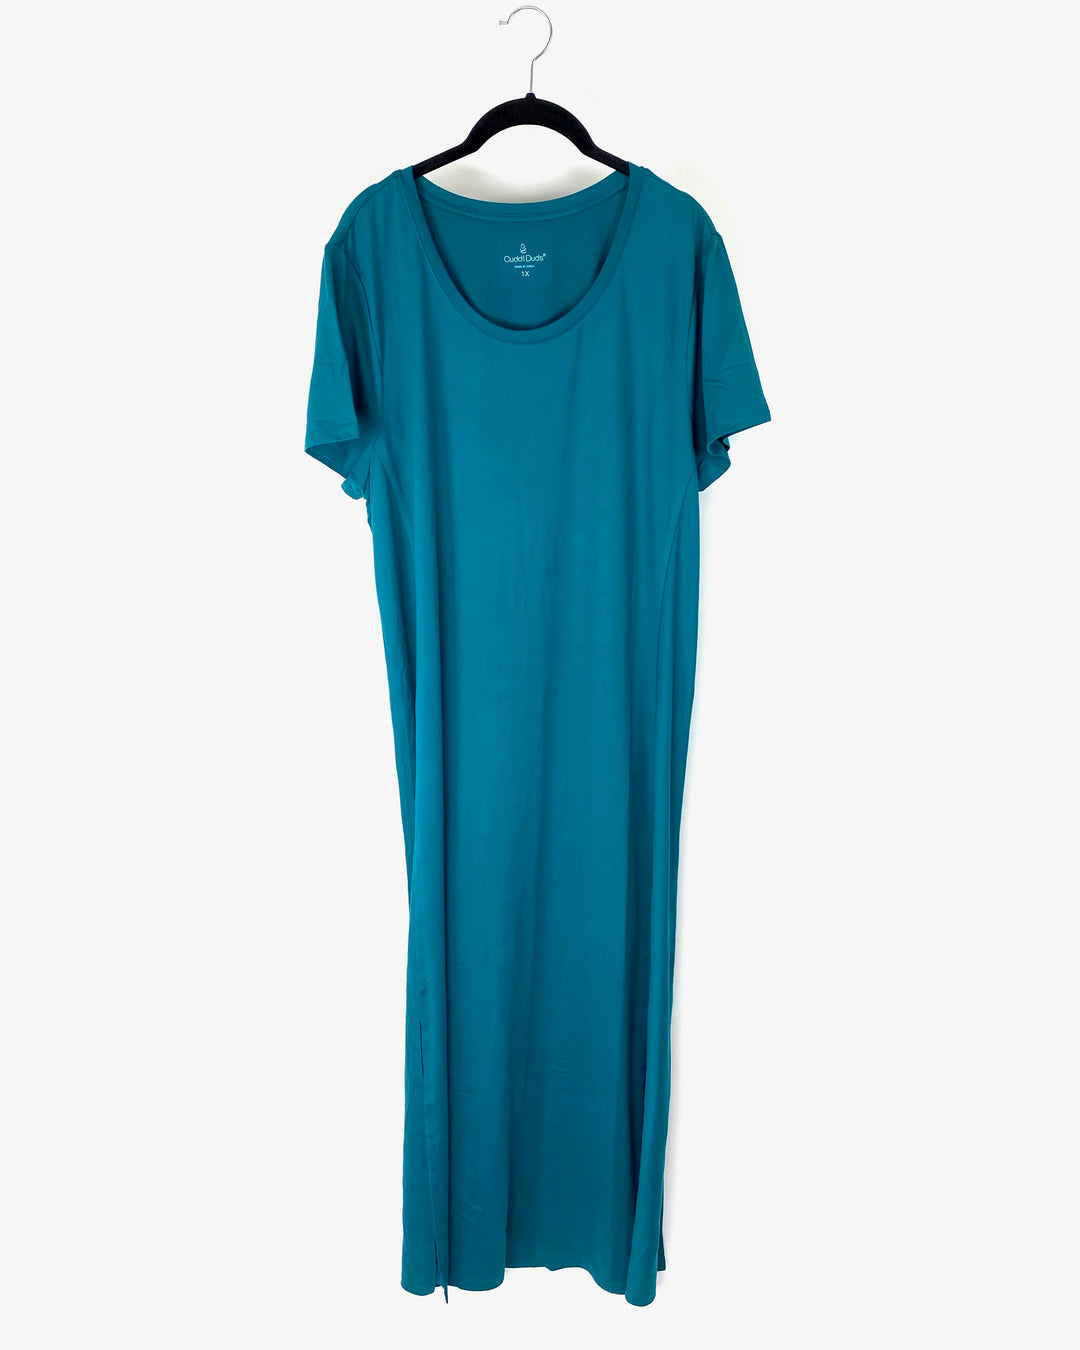 Teal Dress - Extra Small